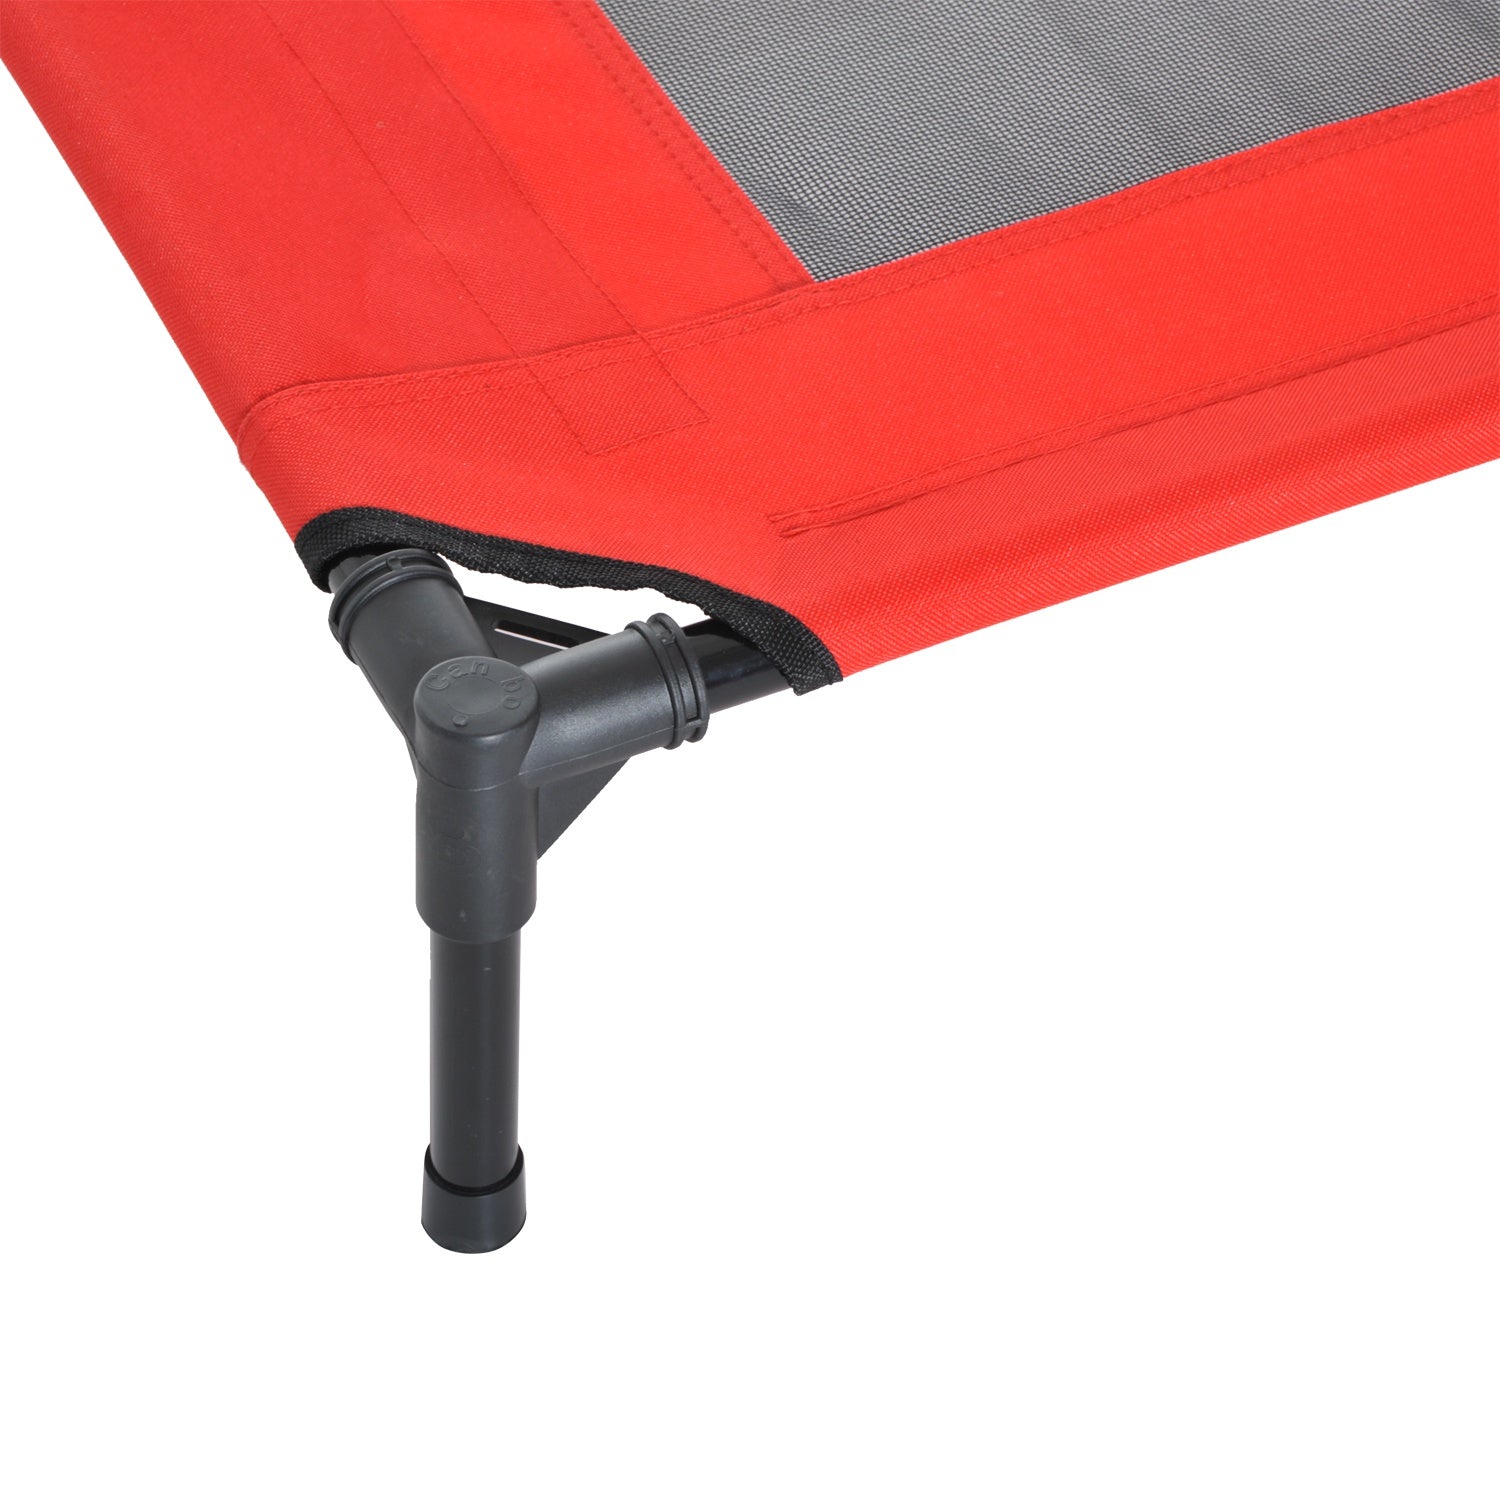 PawHut Elevated Pet Bed Portable Camping Raised Dog Bed w/ Metal Frame Black and Red (Medium) - Inspirely